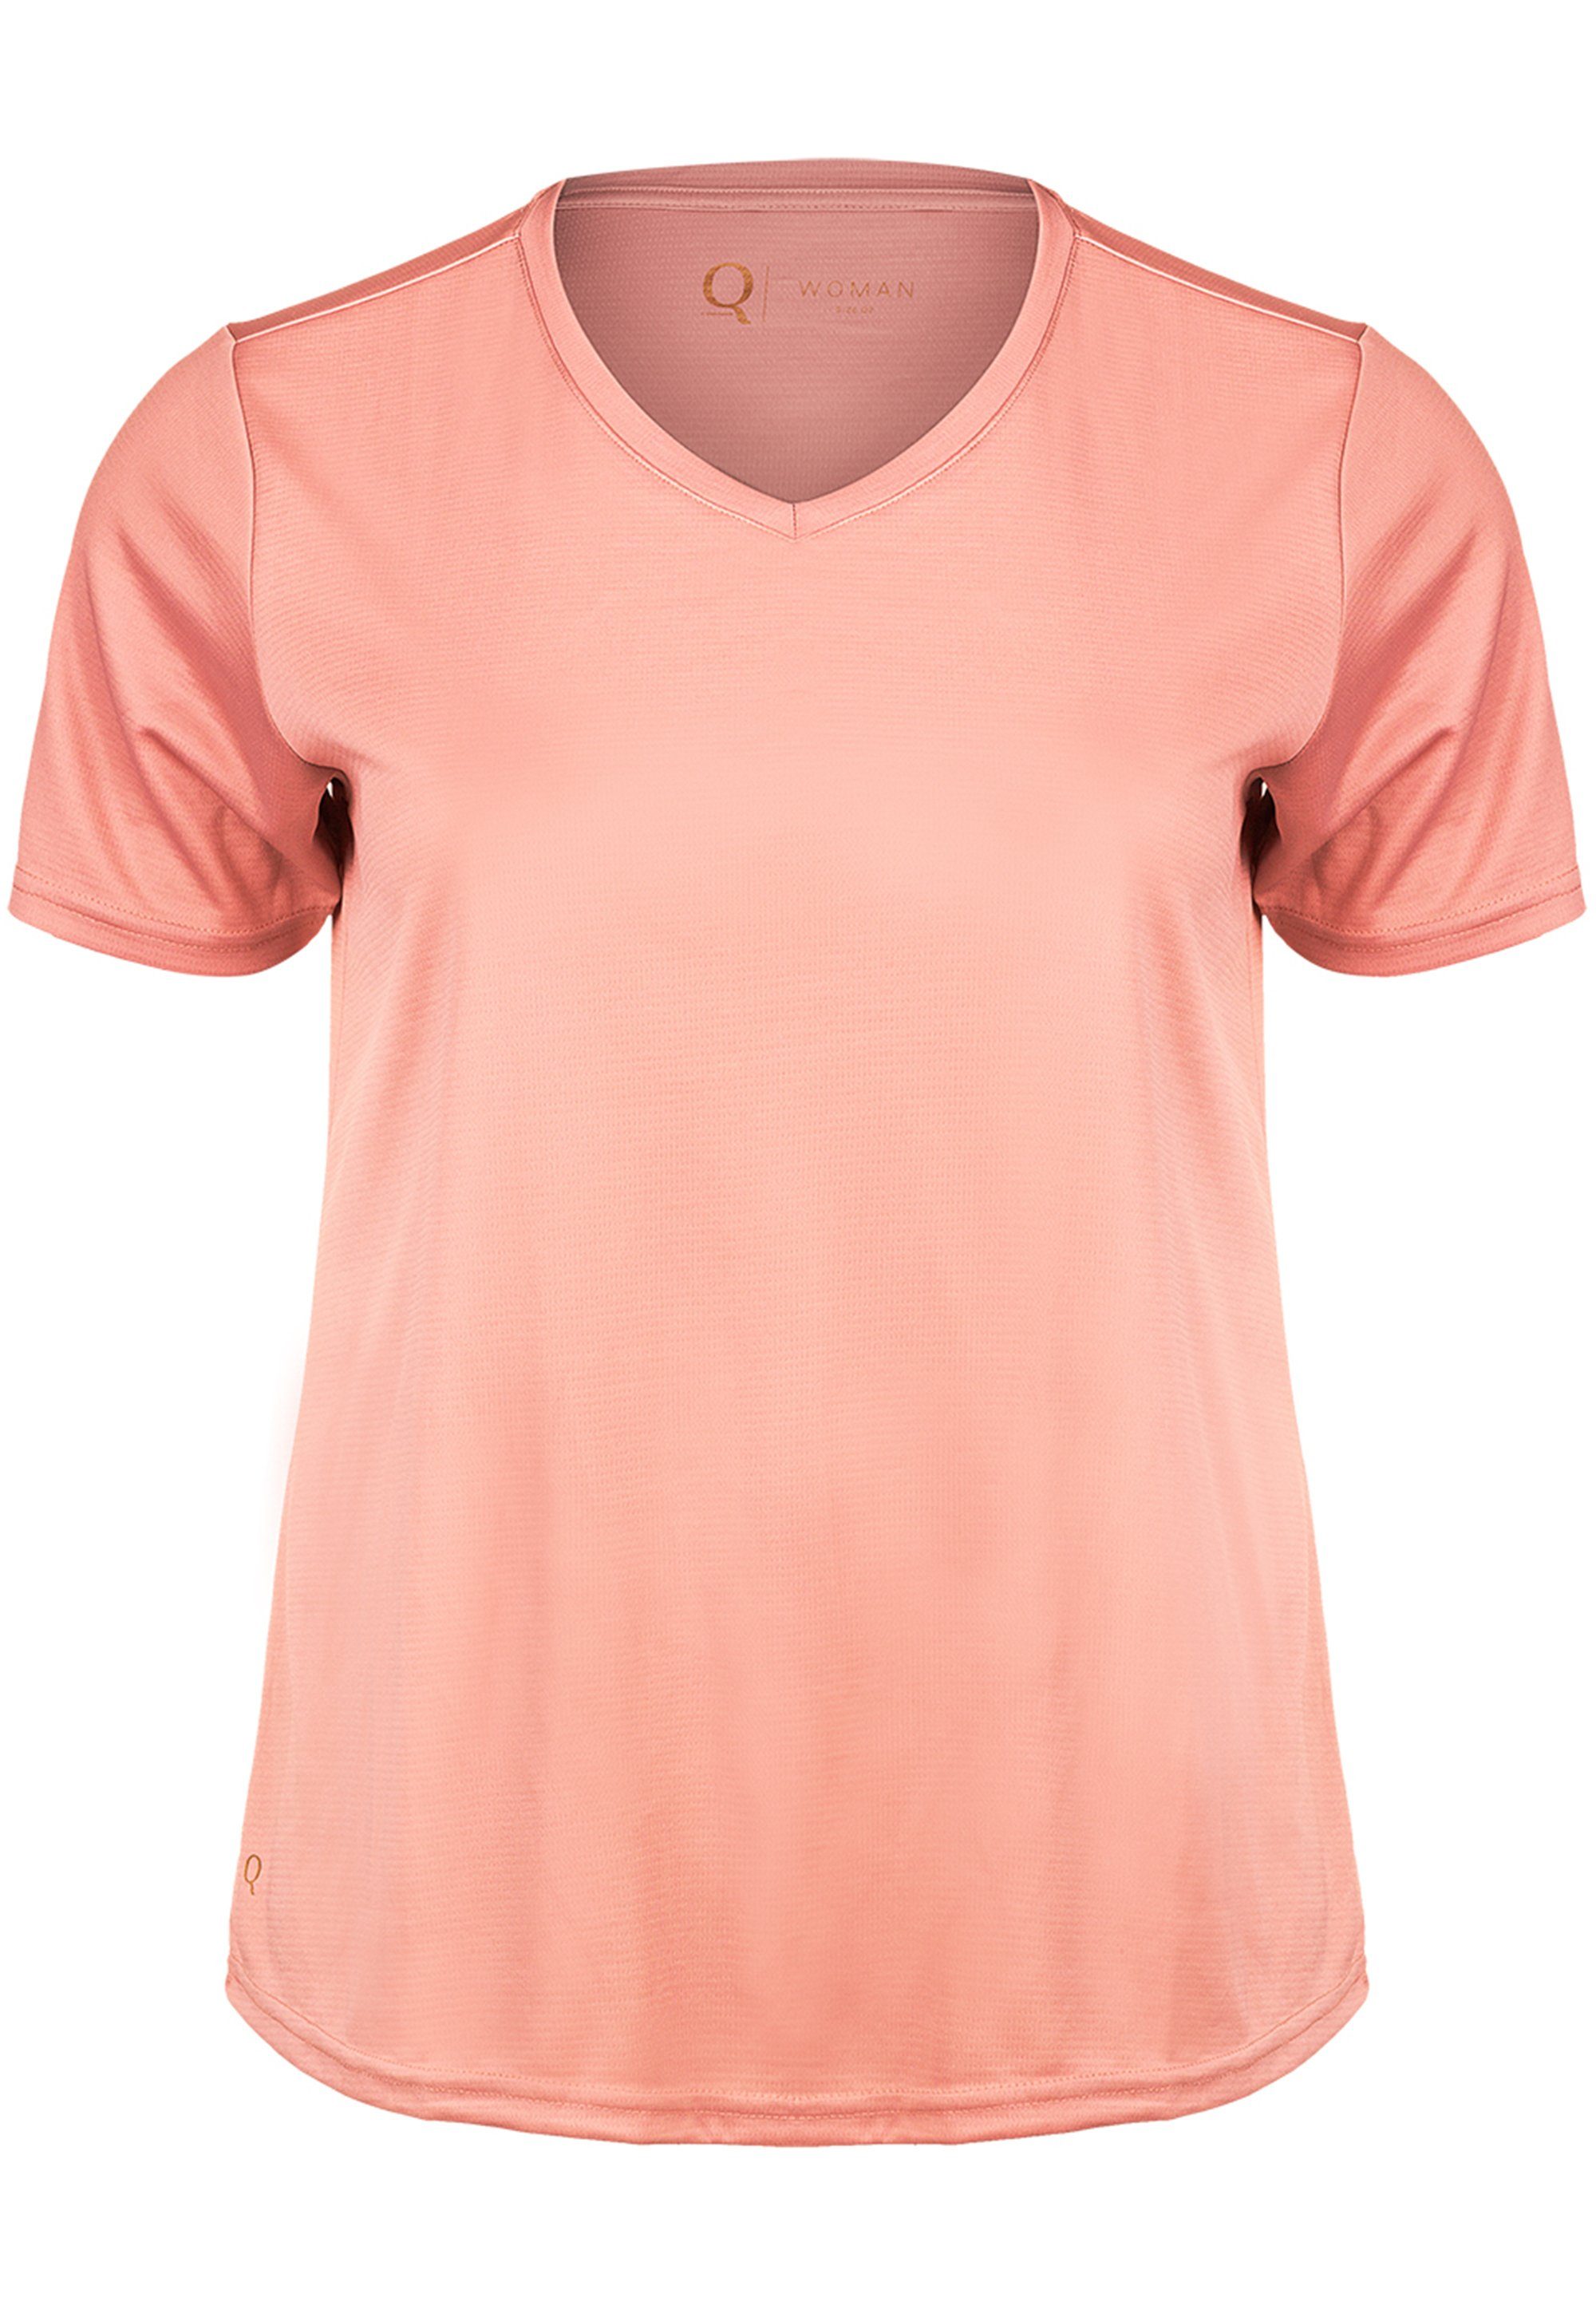 Funktionsshirt ANNABELLE (1-tlg) Endurance by Q DRY-Technologie QUICK rosa-pastell mit